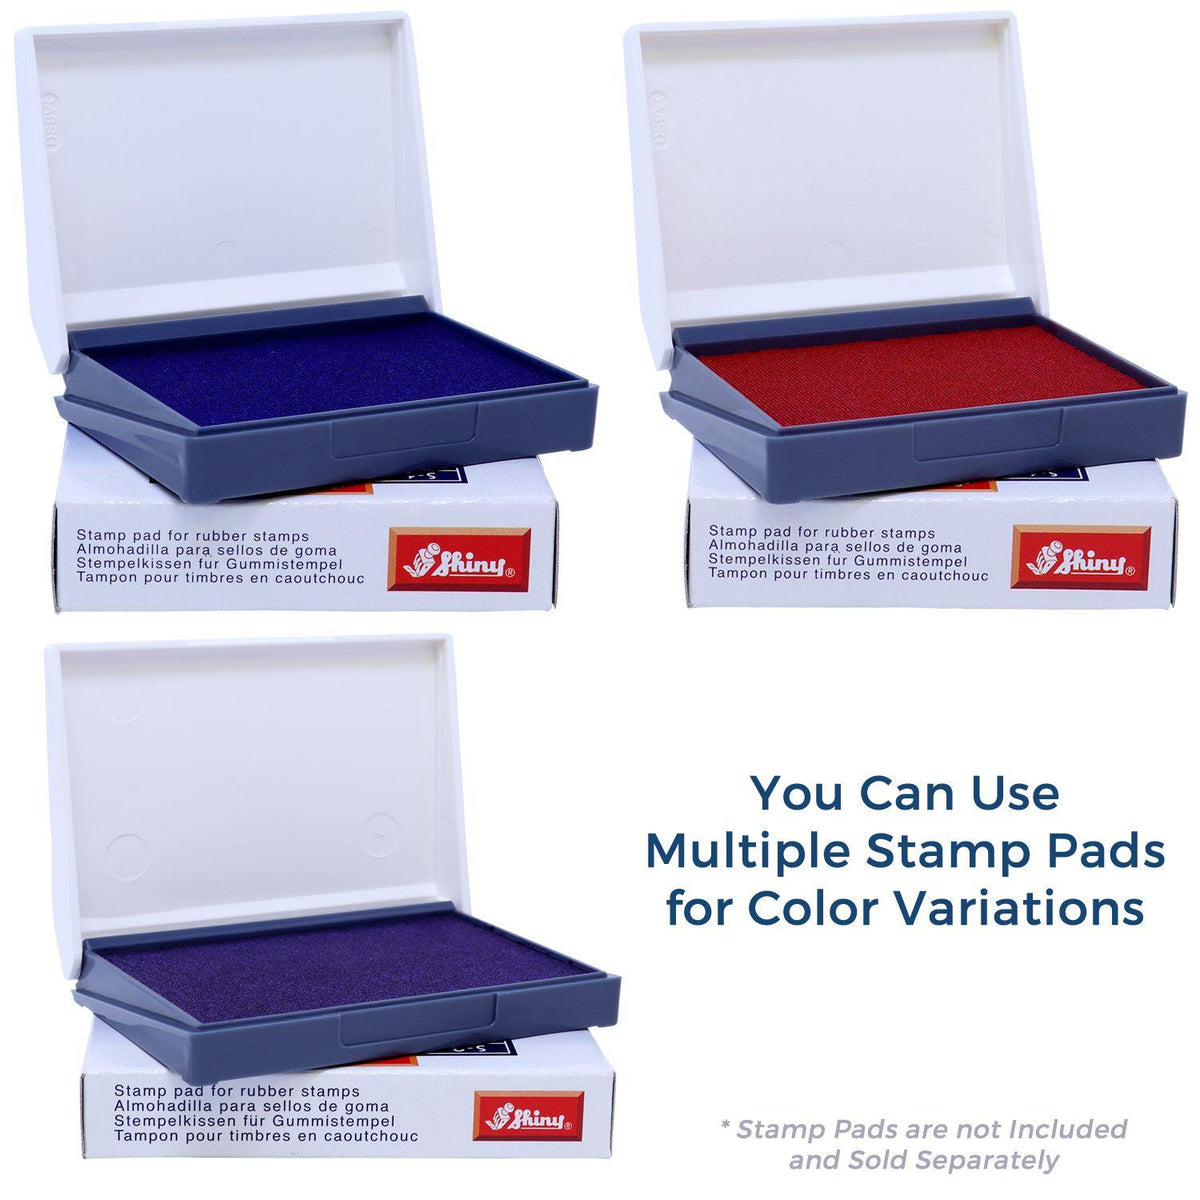 Stamp Pads for Large nCov Rubber Stamp Available